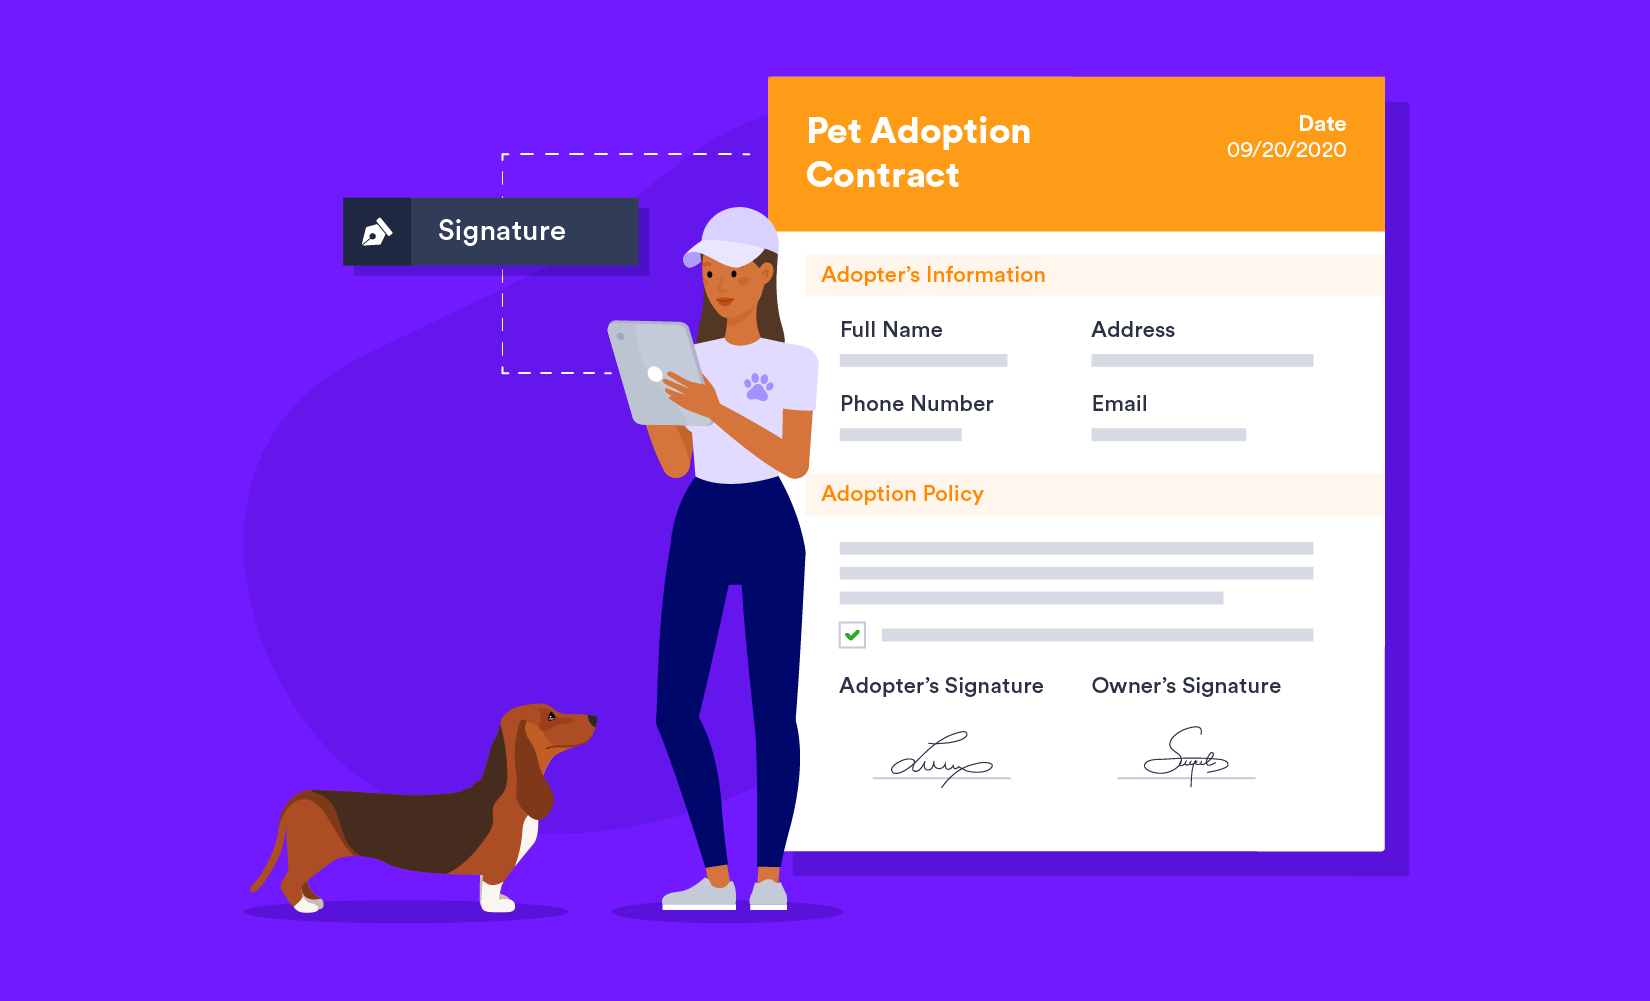 elements of a contract